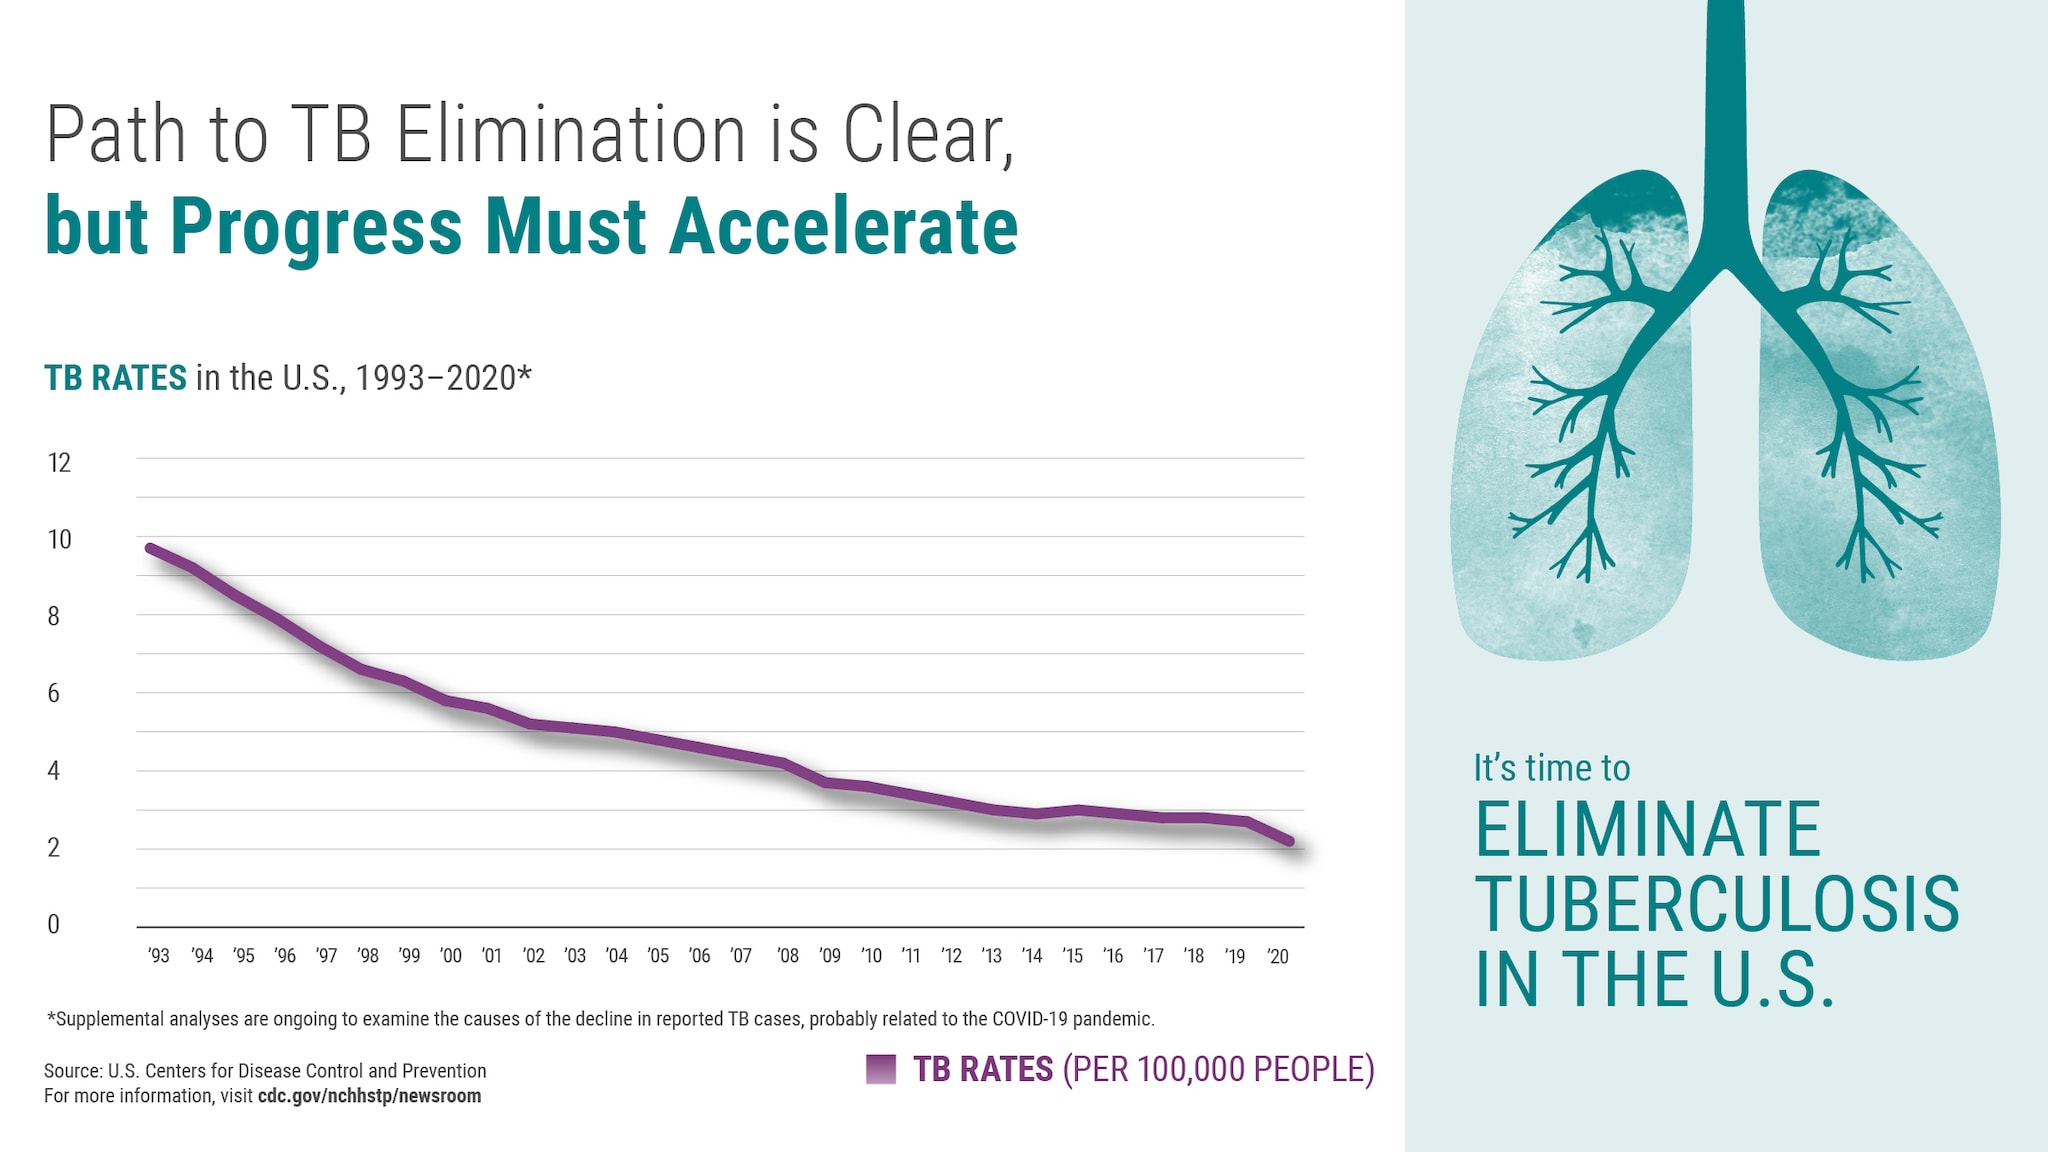 While decreases in the U.S. TB rate has continued since 1993, the decrease has slowed in recent years. Preliminary 2020 data show that the current TB rate (2.2 cases per 100,000 persons) remains at levels 22 times higher than the TB elimination target rate. 